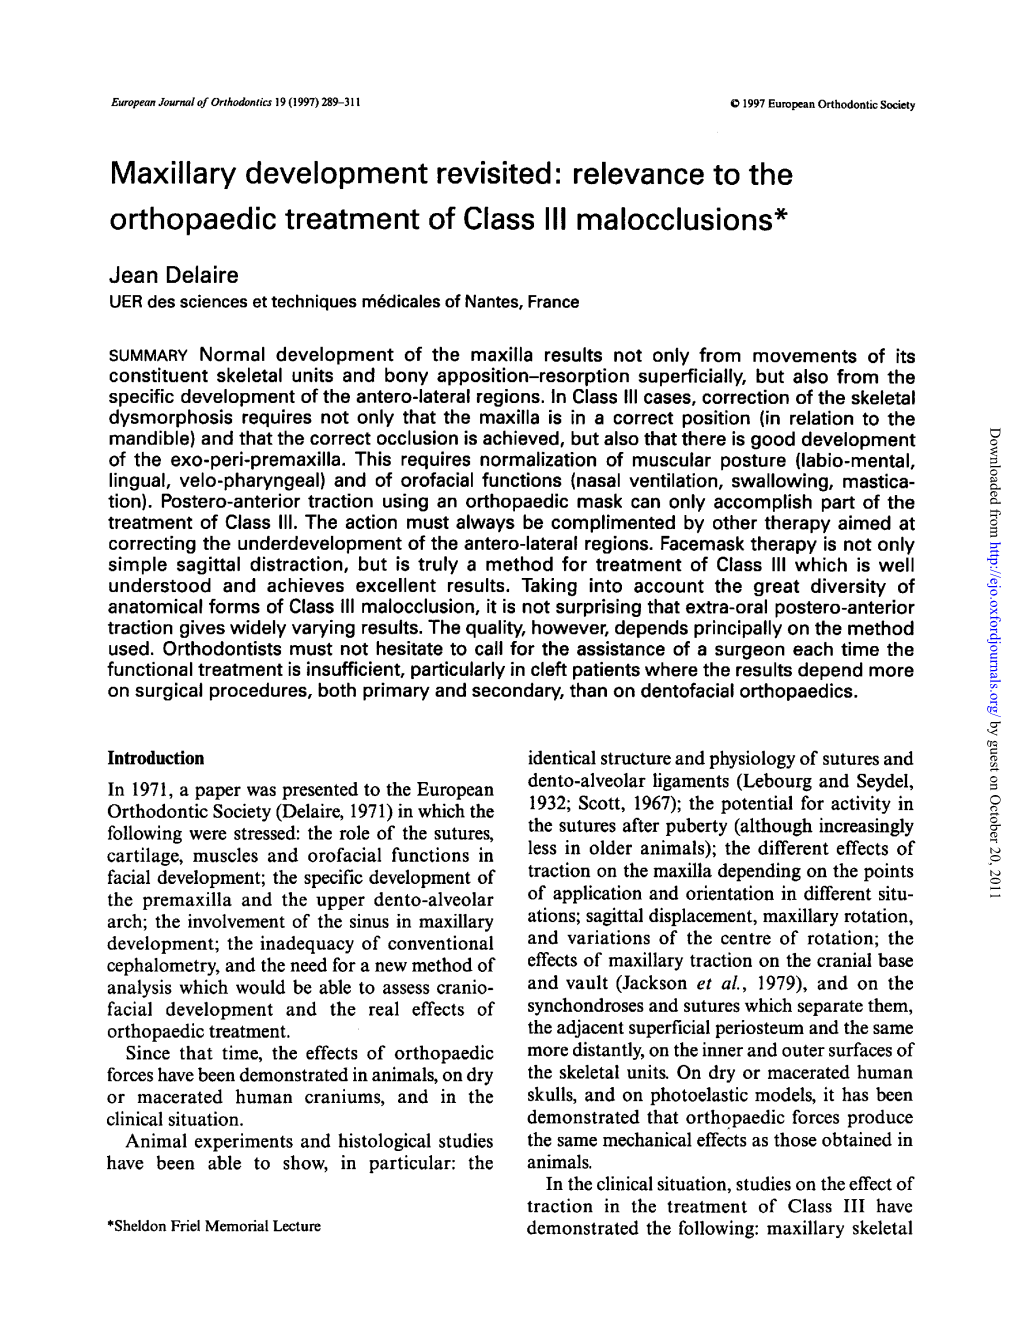 Maxillary Development Revisited: Relevance to the Orthopaedic Treatment of Class III Malocclusions*